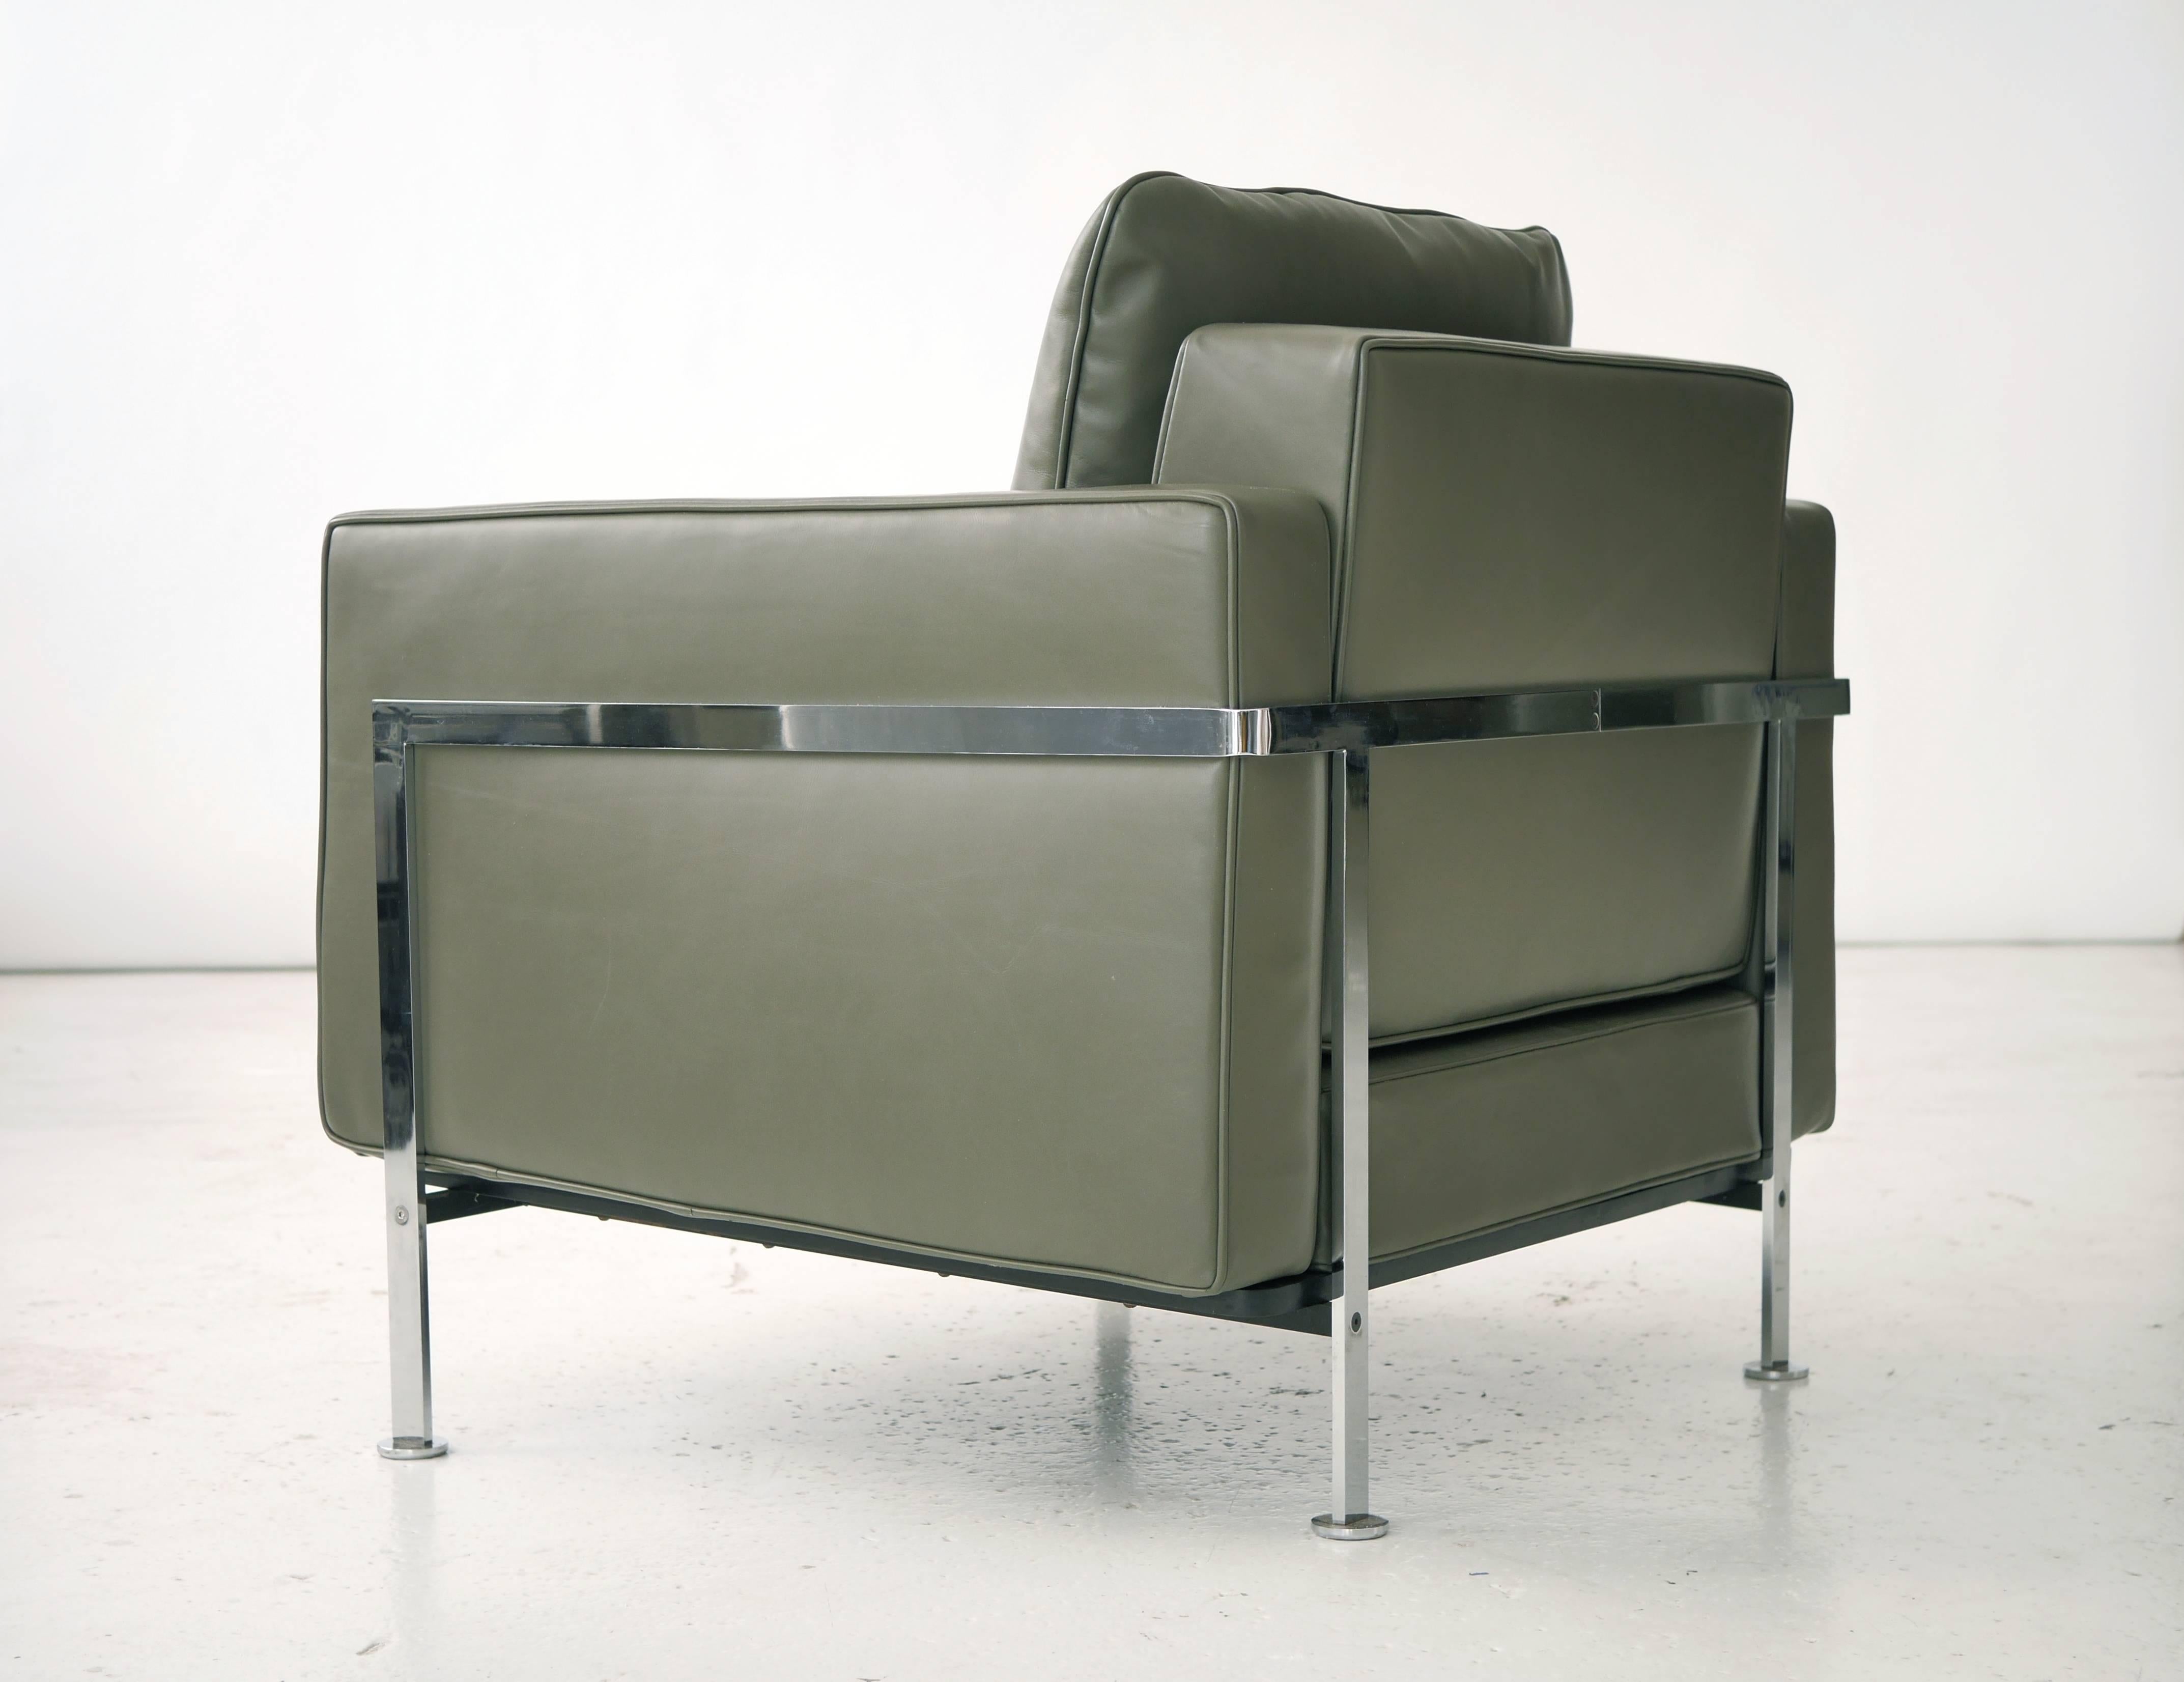 Robert Haussmann for De Sede, 1965.
The chairs have been reupholstered in club green leather.